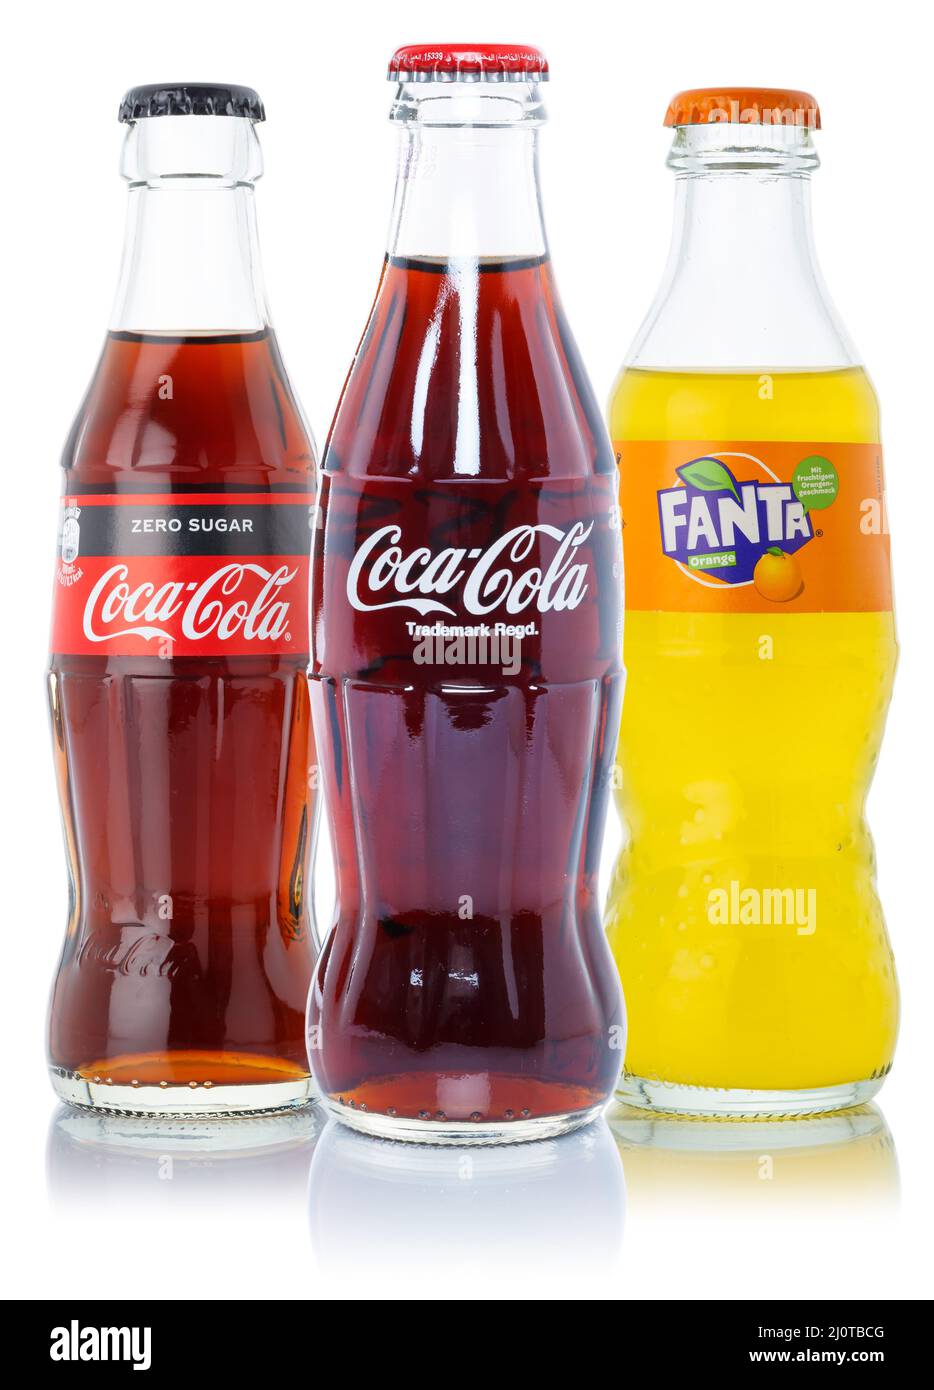 Coca Cola Coca-Cola Products Fanta Lemonade Drinks In Bottles Cutout isolated against a white background Stock Photo